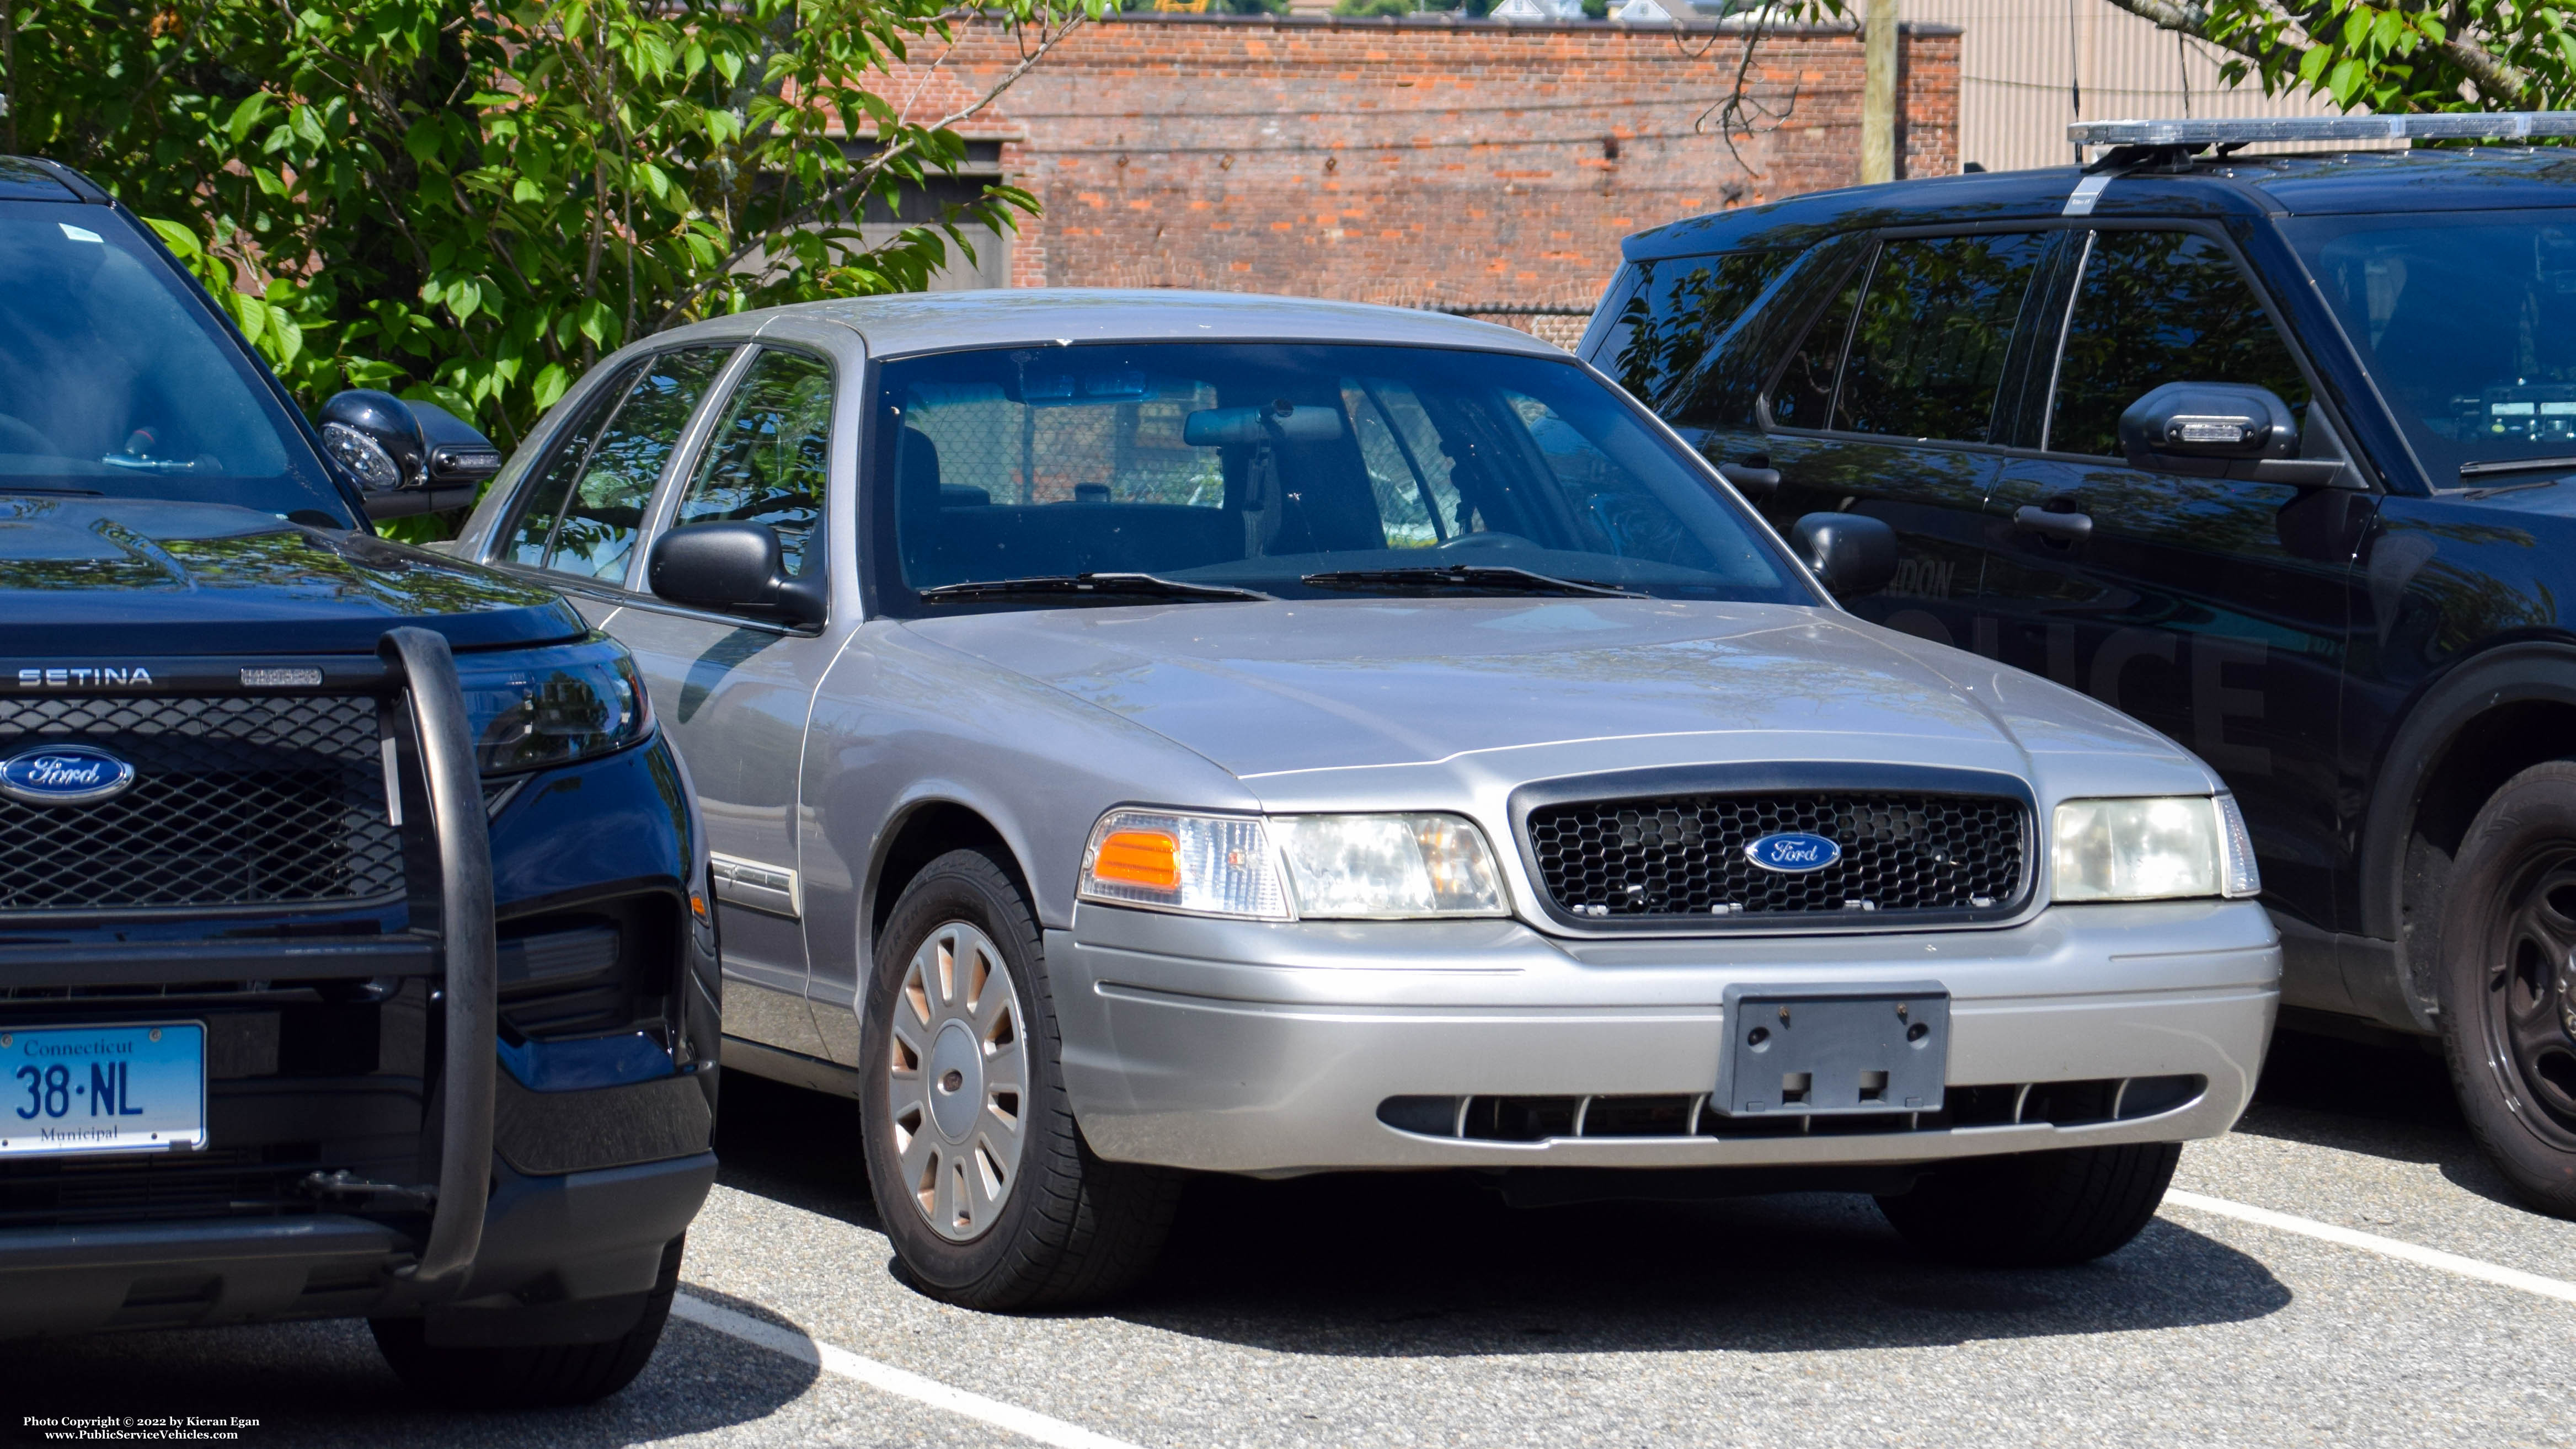 A photo  of New London Police
            Unmarked Unit, a 2009-2011 Ford Crown Victoria Police Interceptor             taken by Kieran Egan